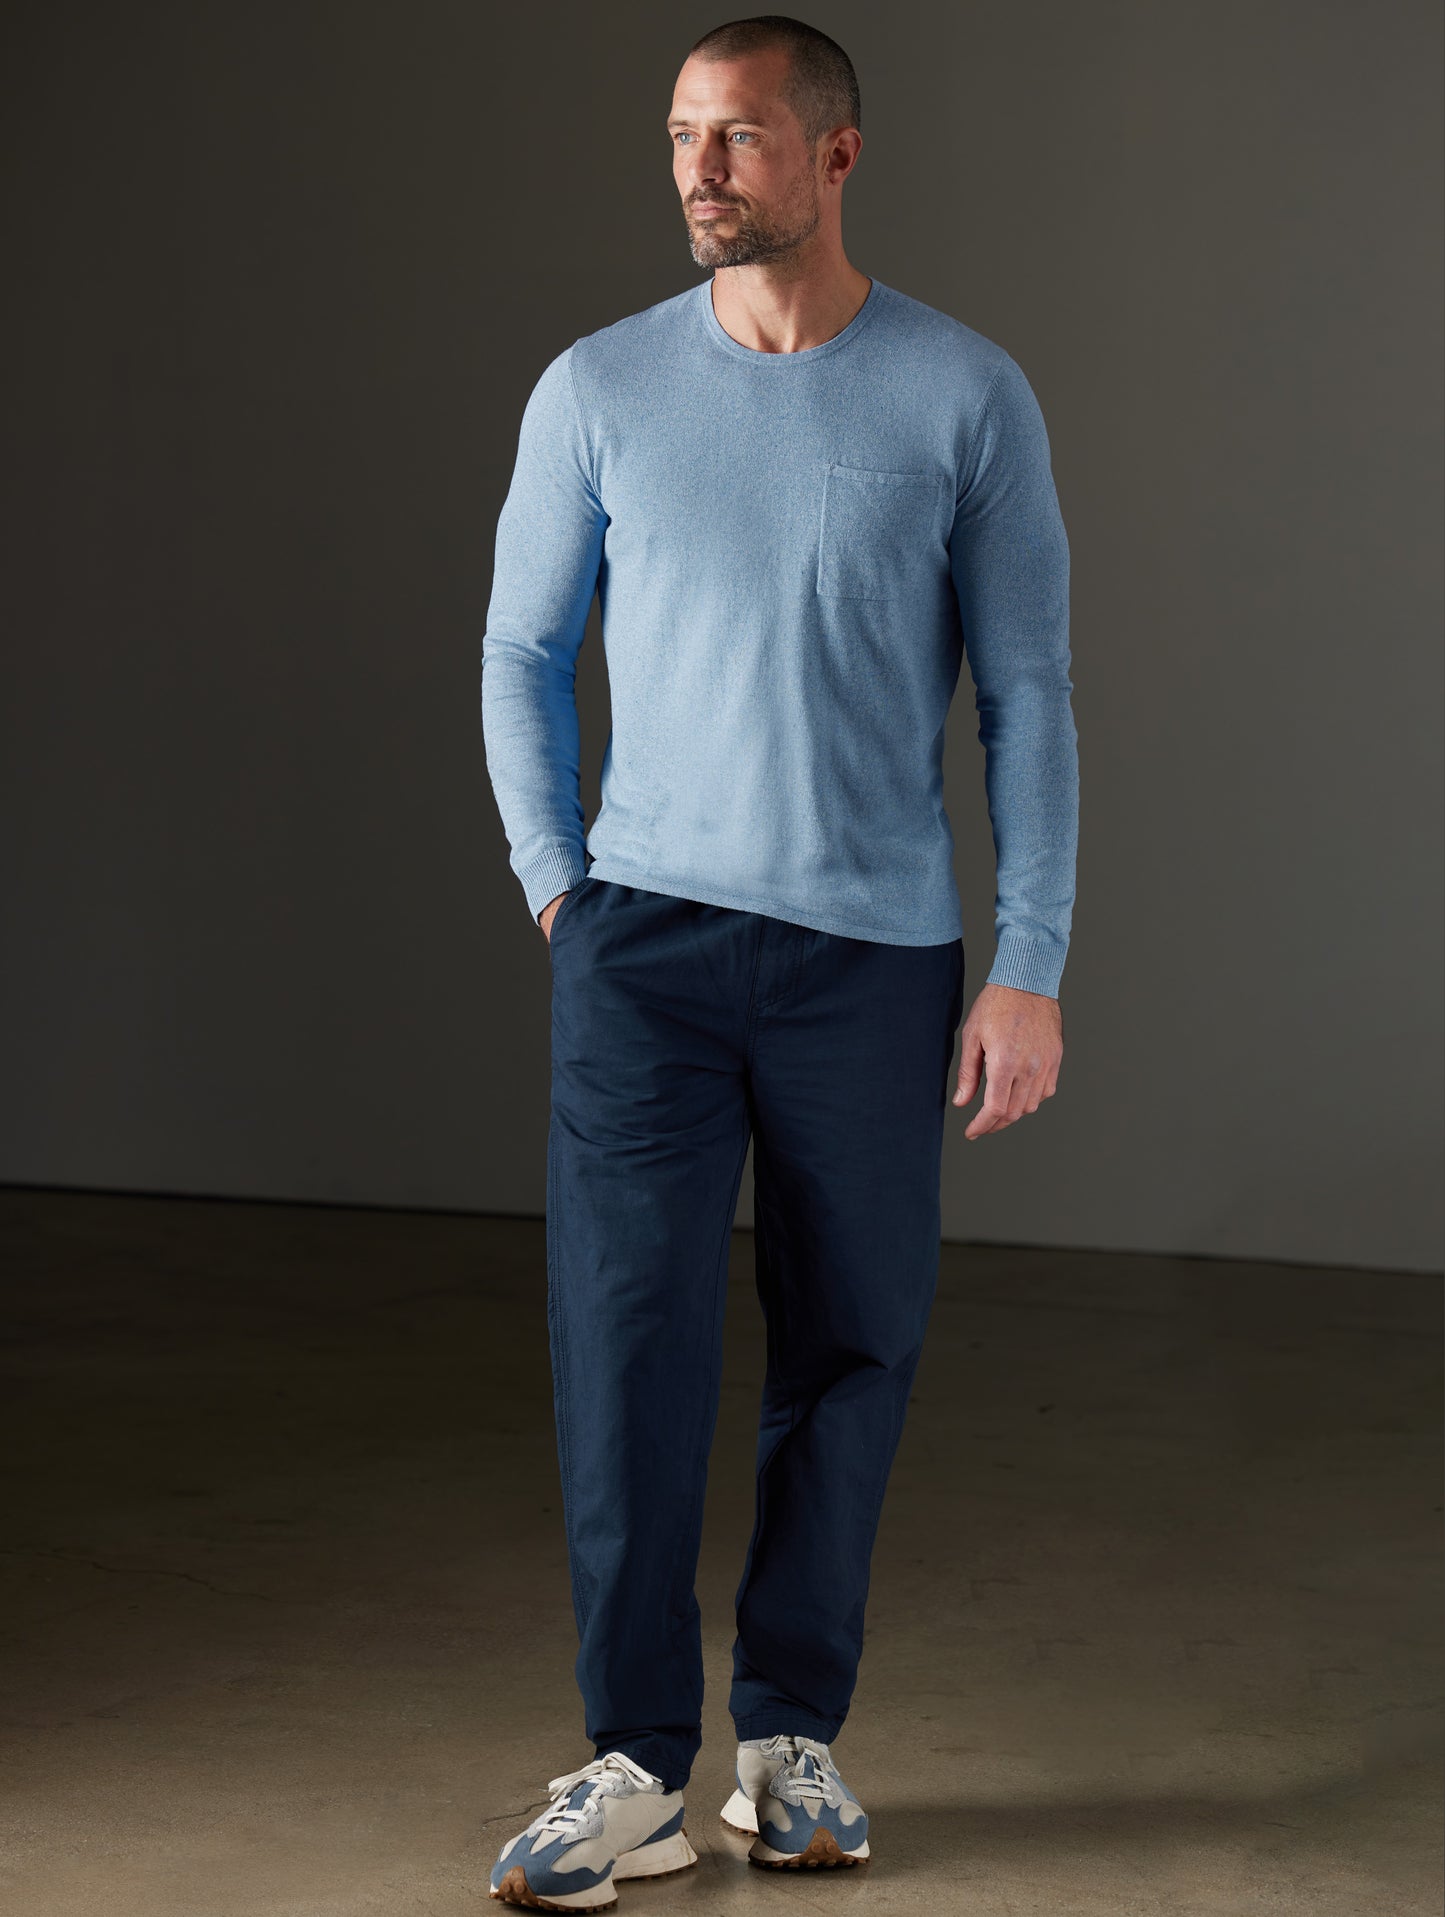 Man wearing a blue sweater from AETHER Apparel